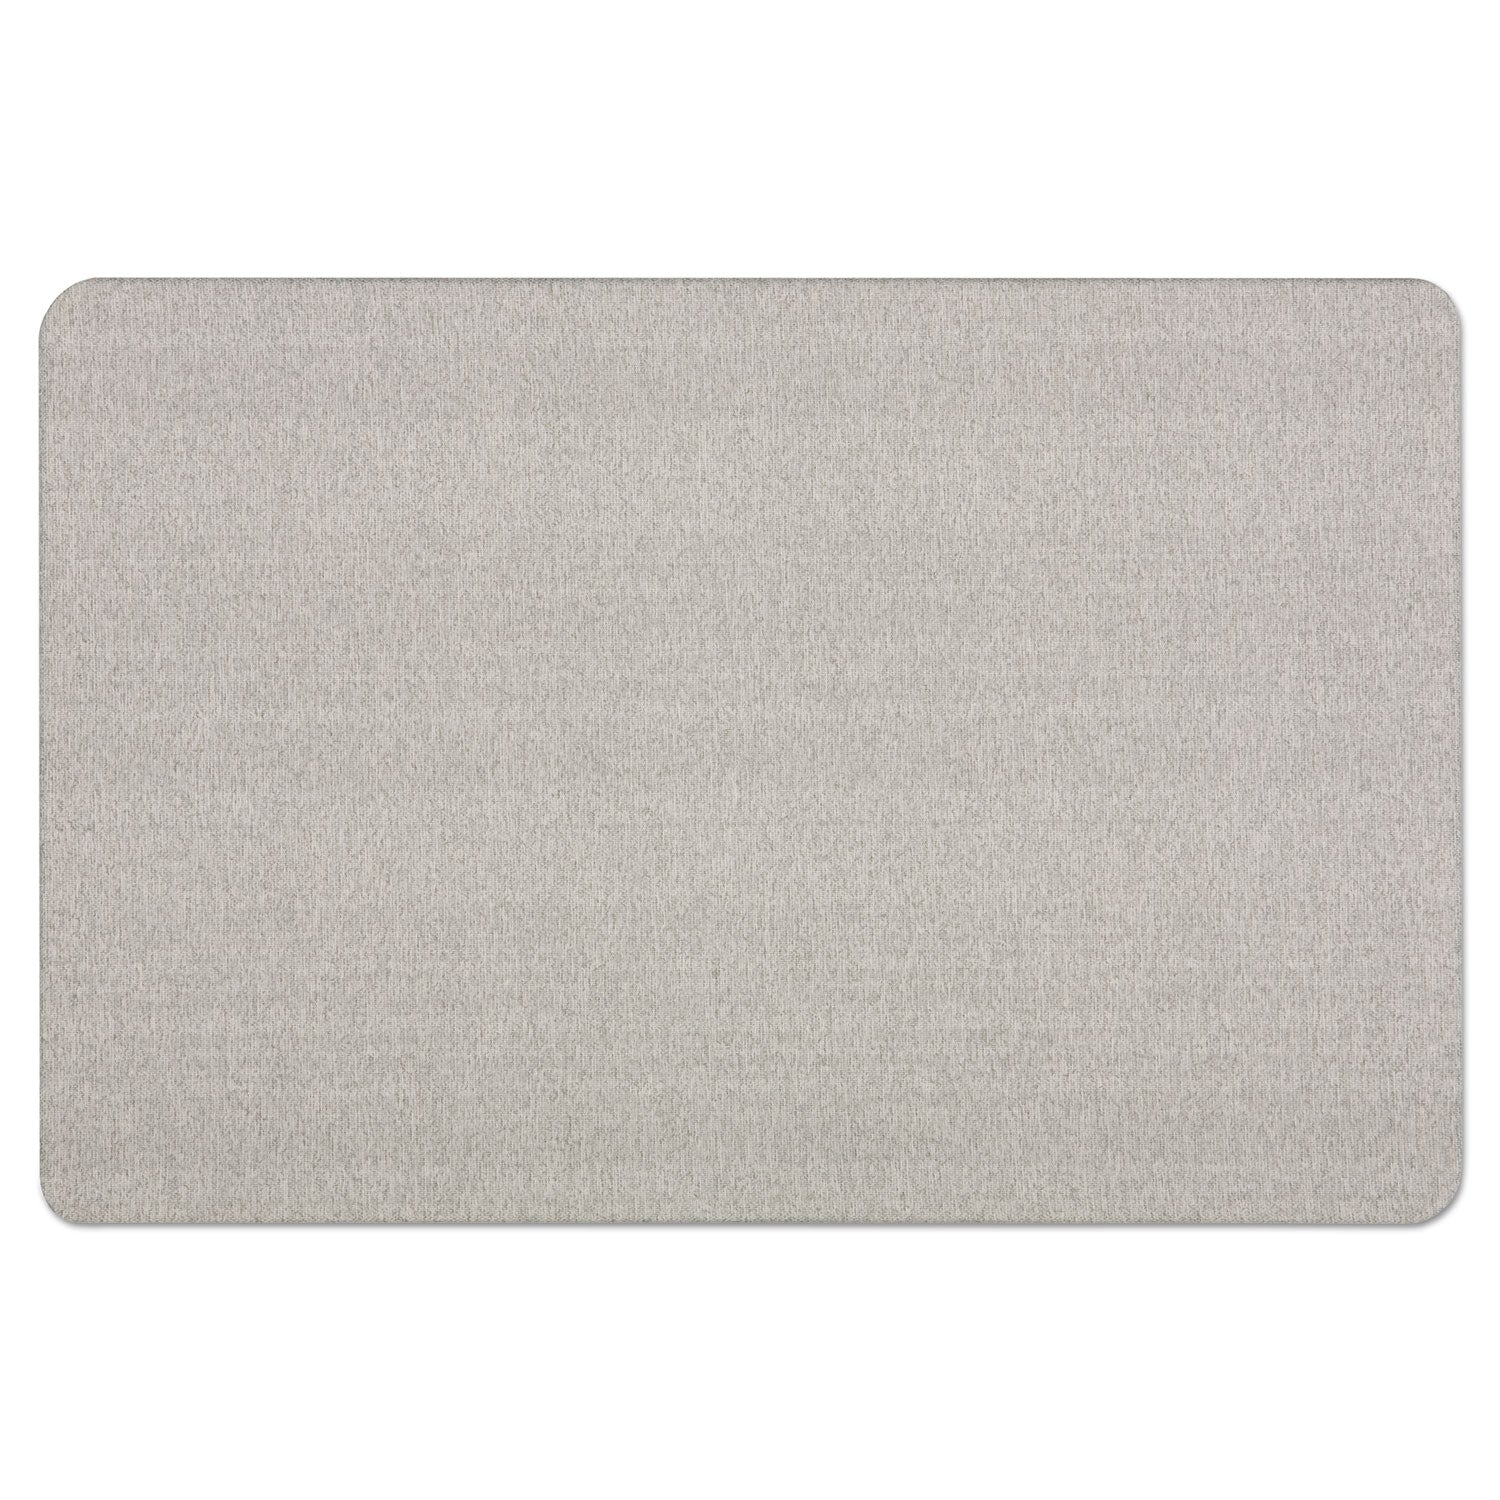 Oval Office Fabric Board, 36 x 24, Gray Surface - 